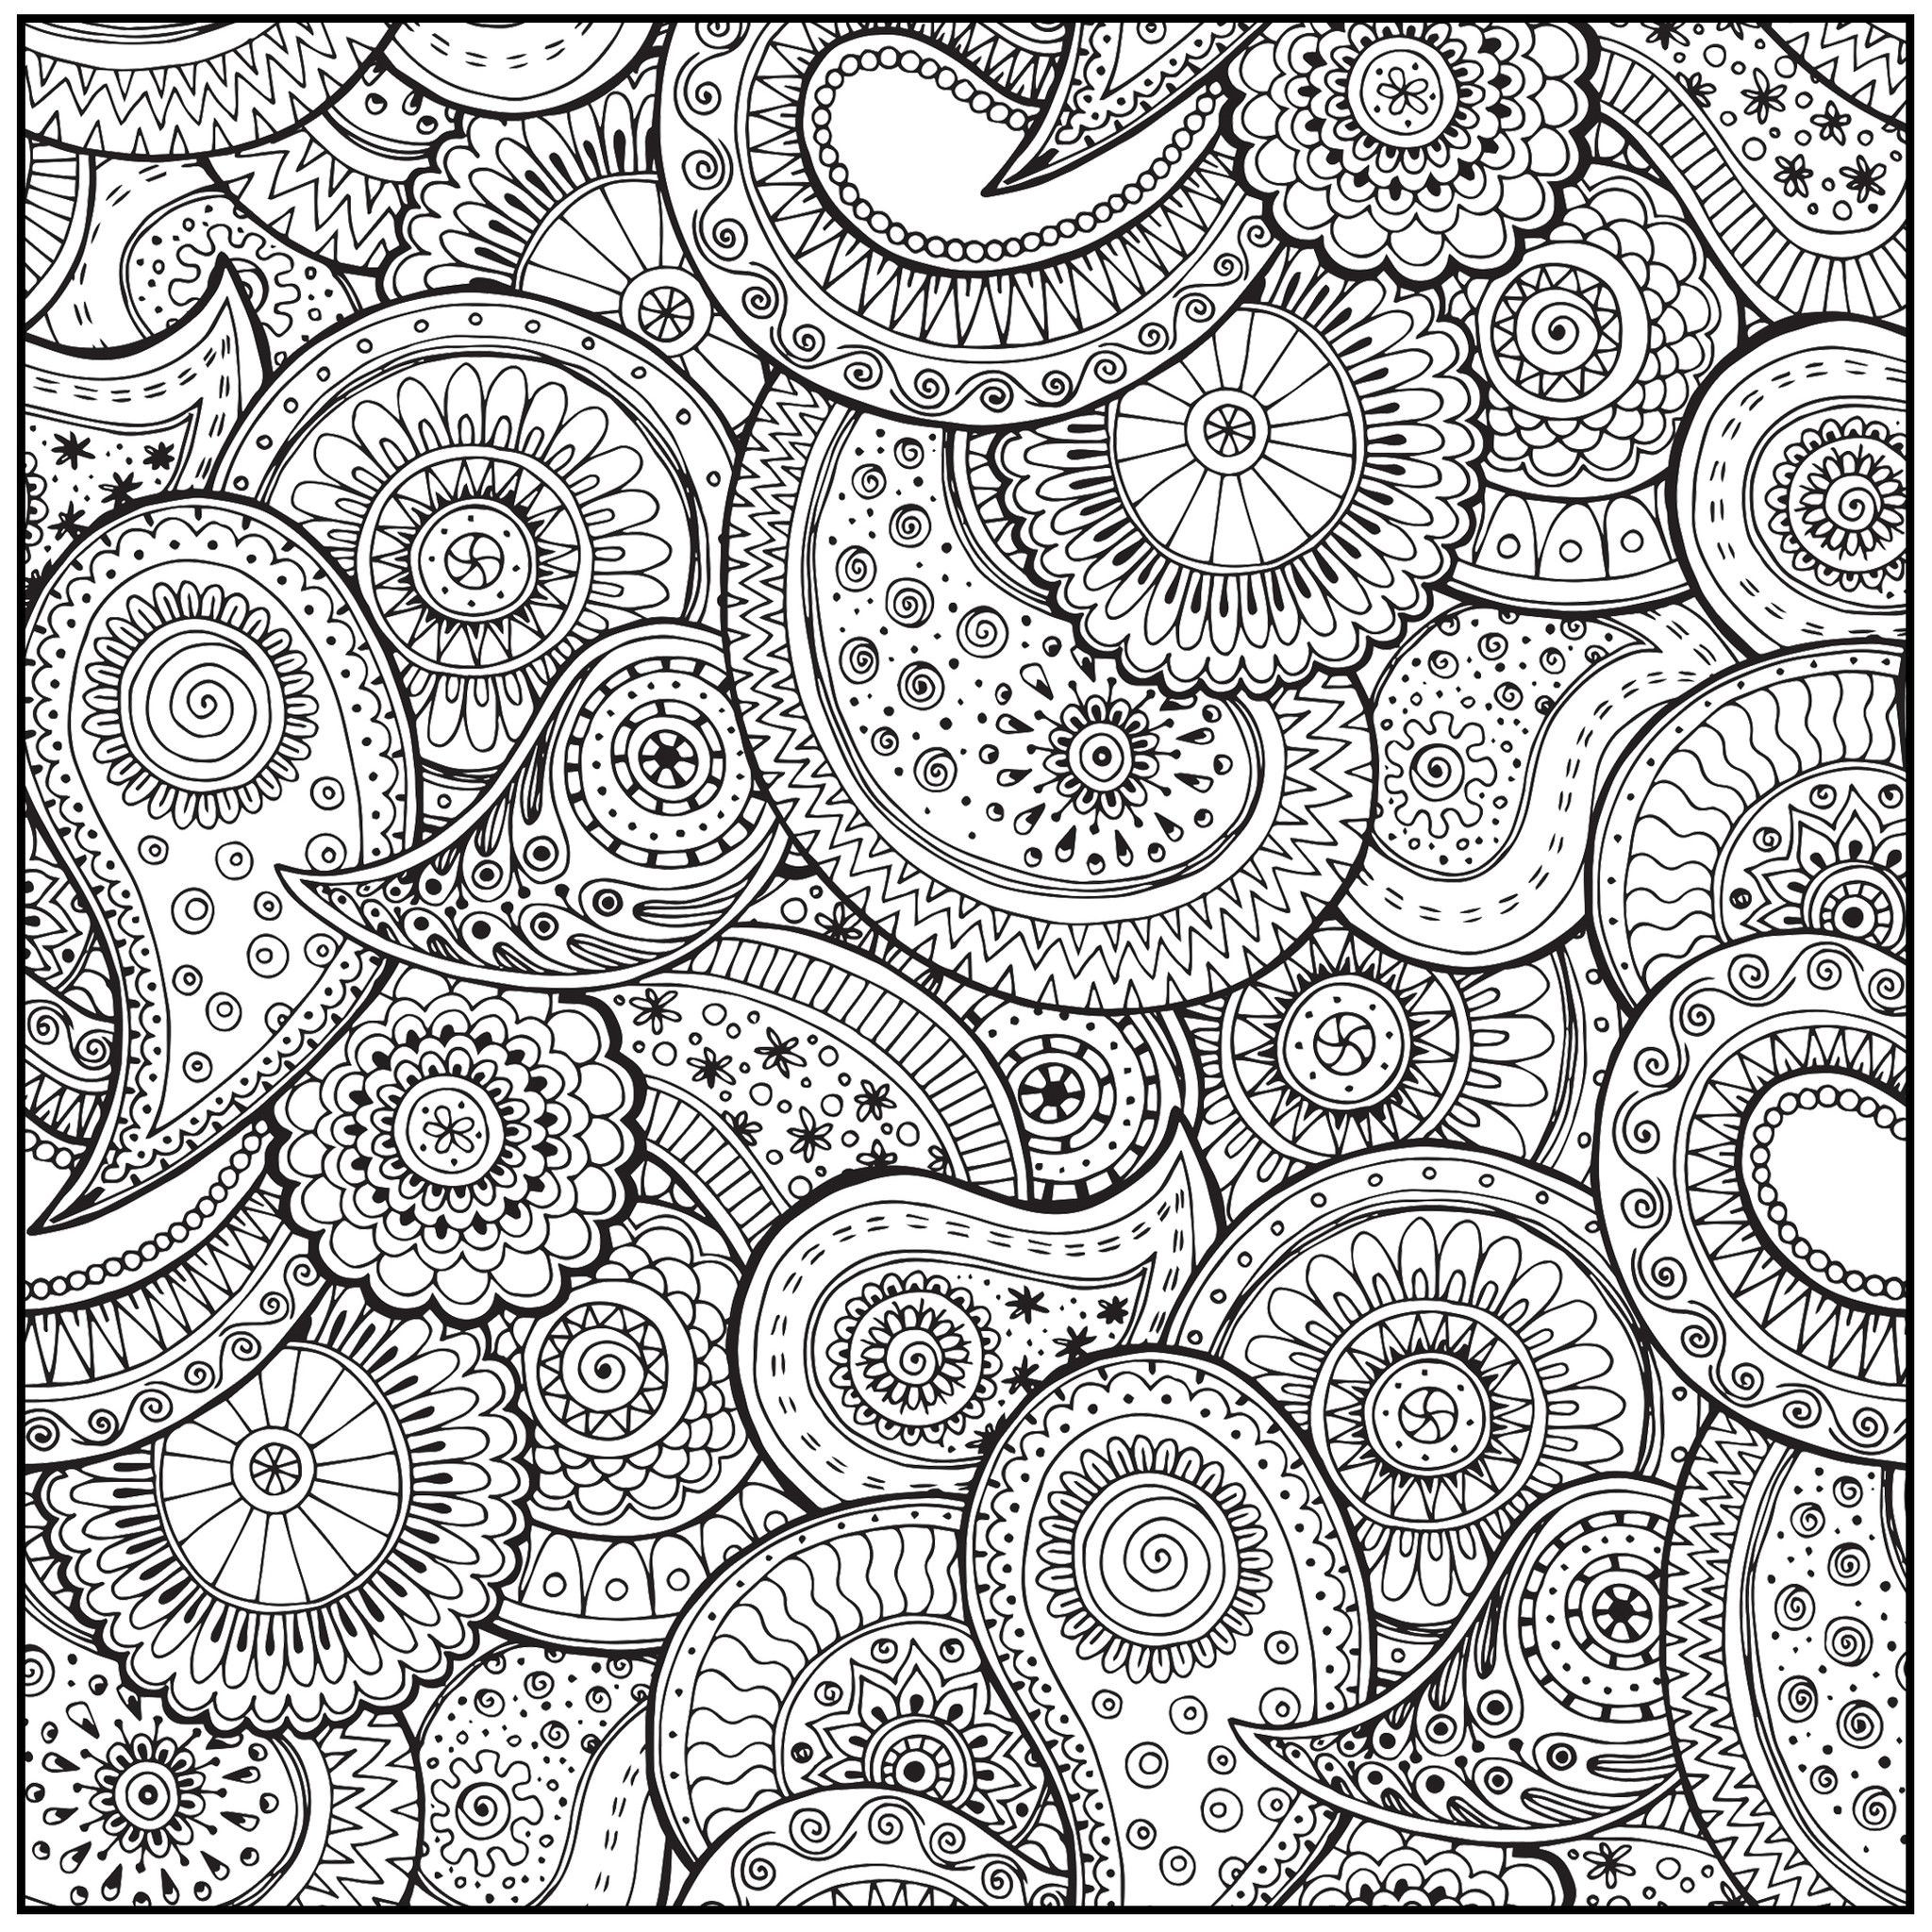 Coloring Pages For Adults Patterns
 Patterns For Adults Free Colouring Pages